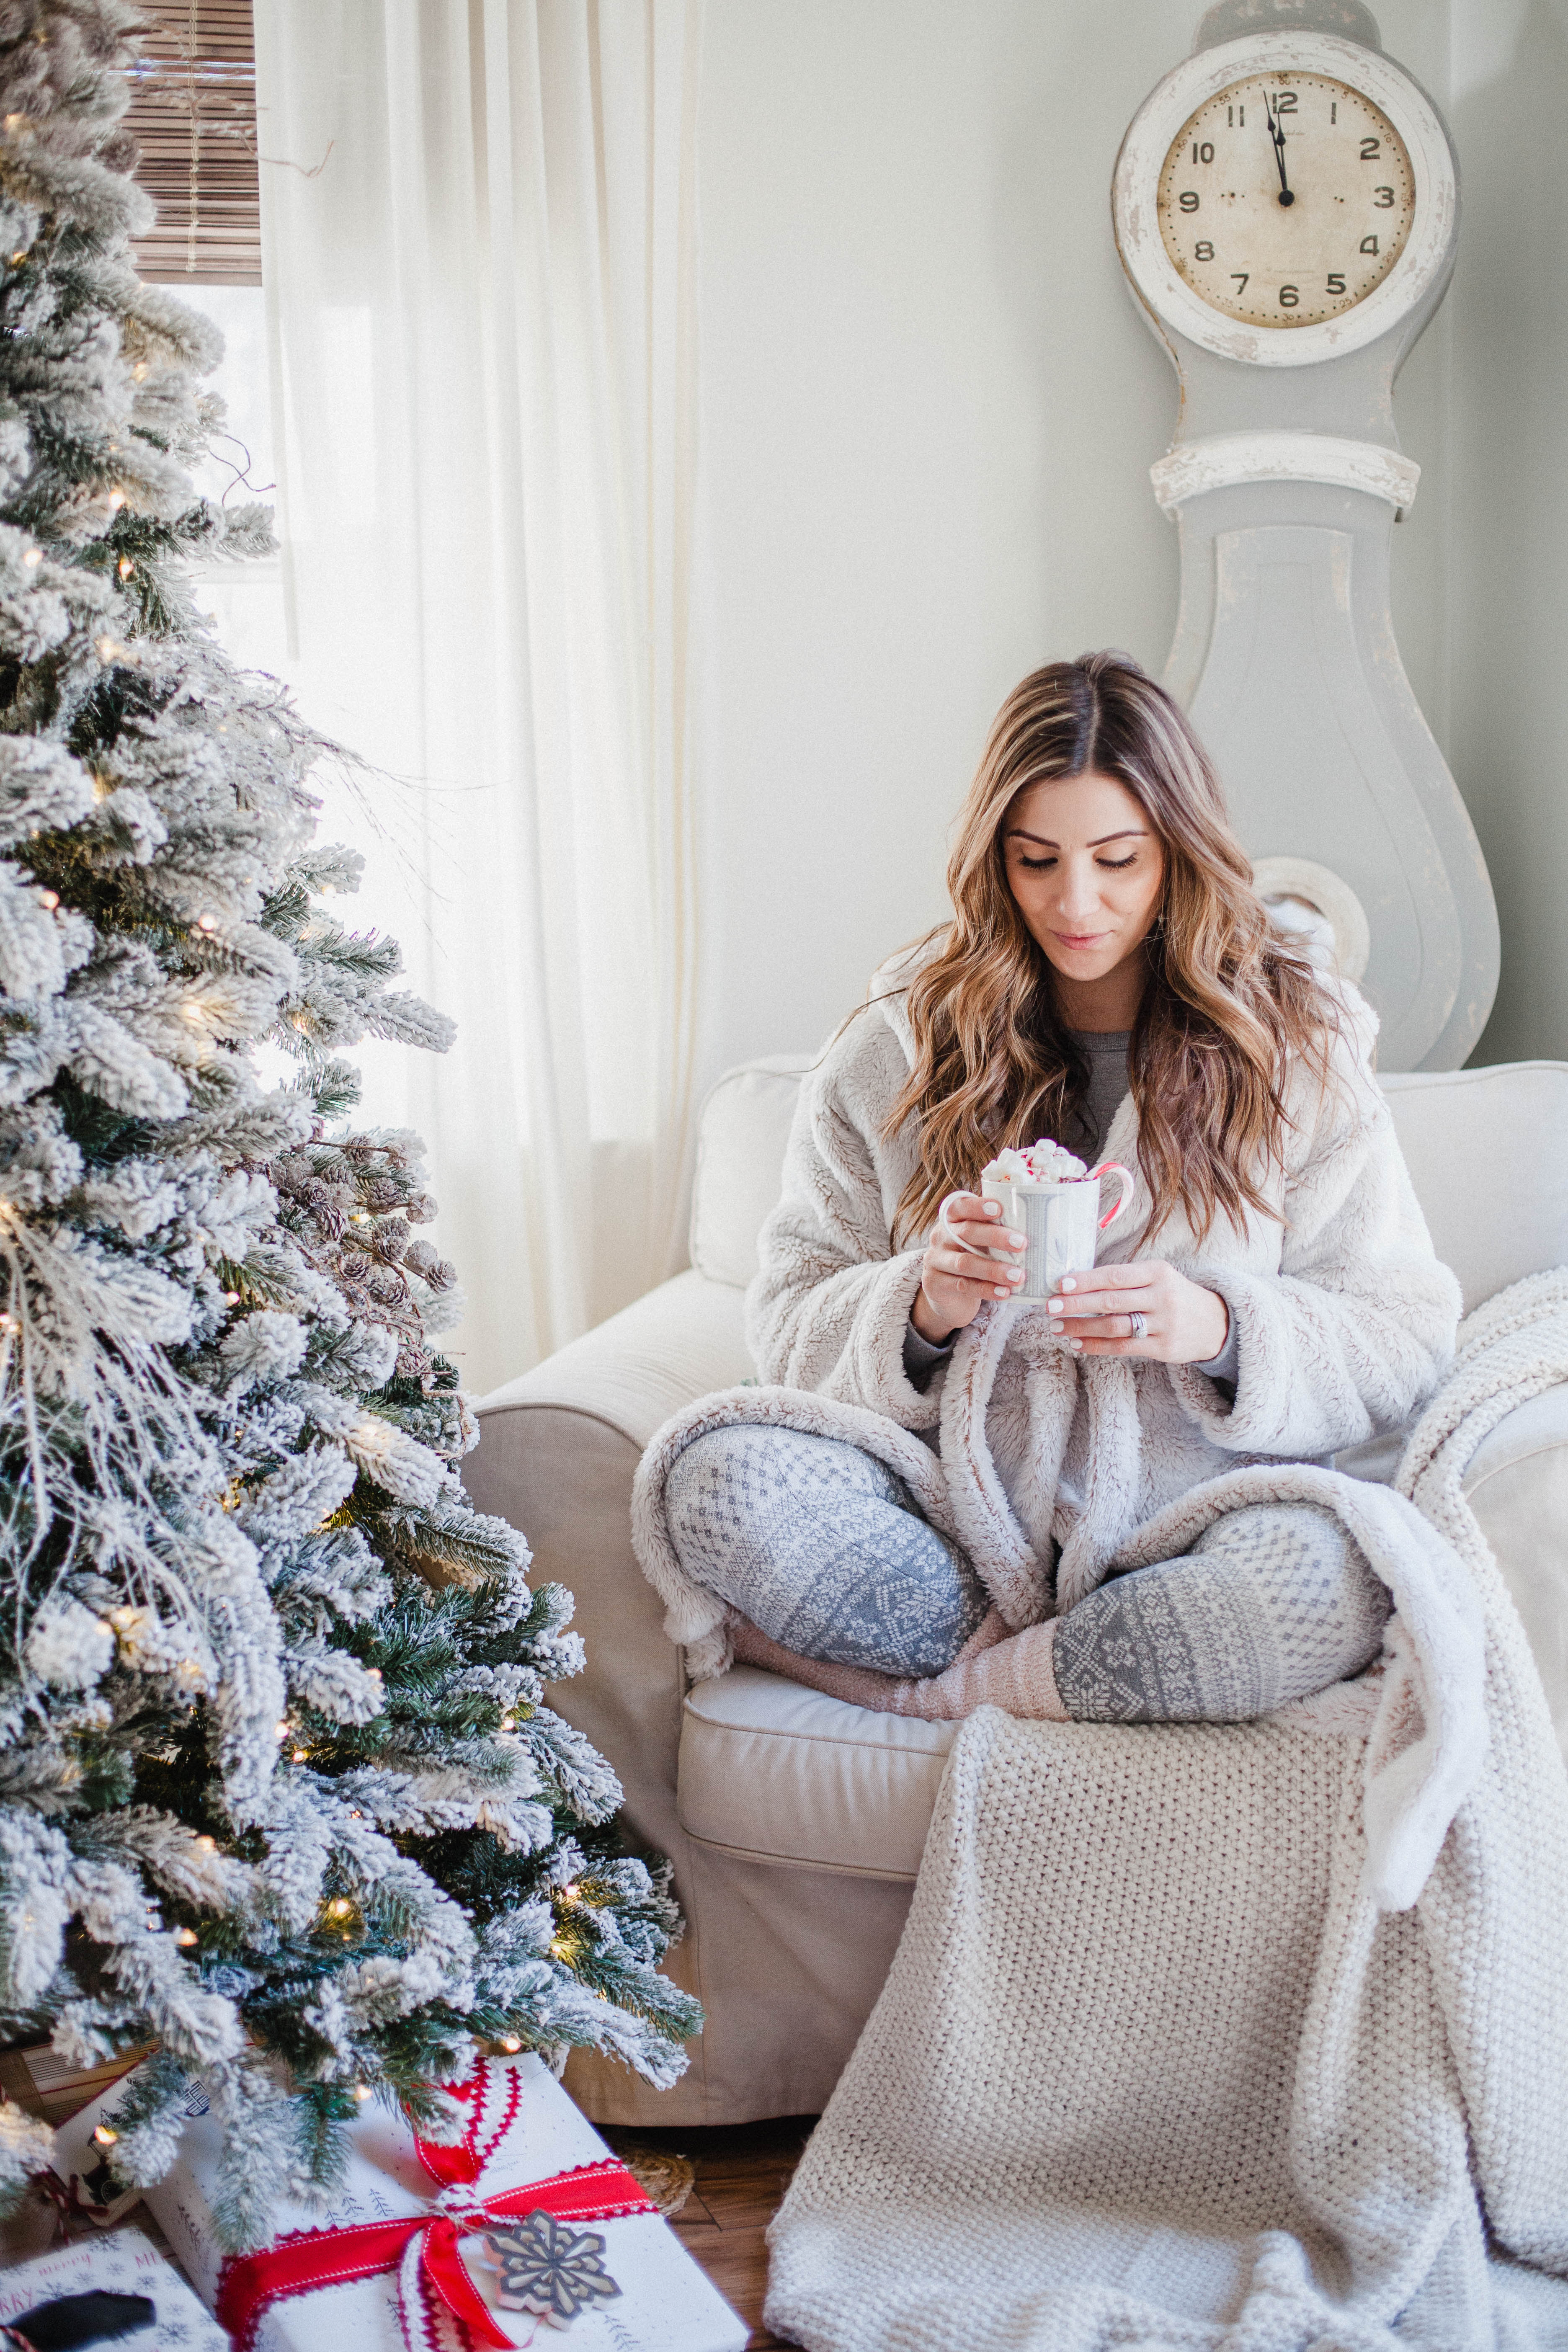 Life and style blogger Lauren McBride shares Gifts for the Whole Family with Marks & Spencer, including gift ideas for her, him, and the kids.